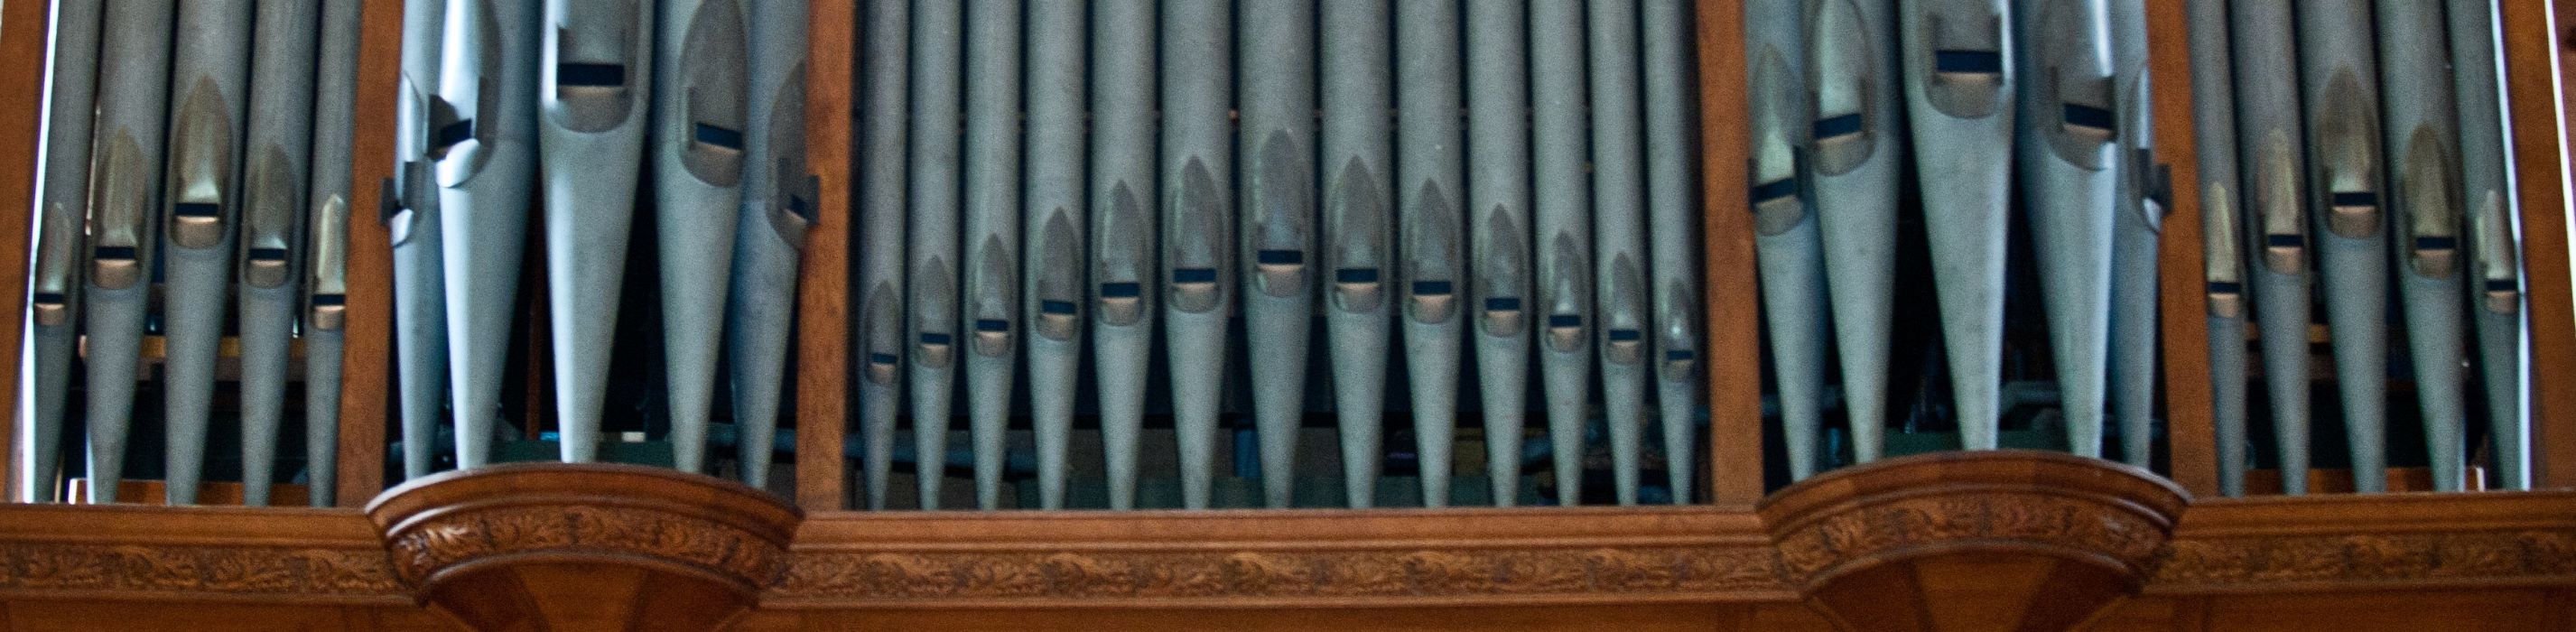 925-organ-cropped-and-resized.jpg